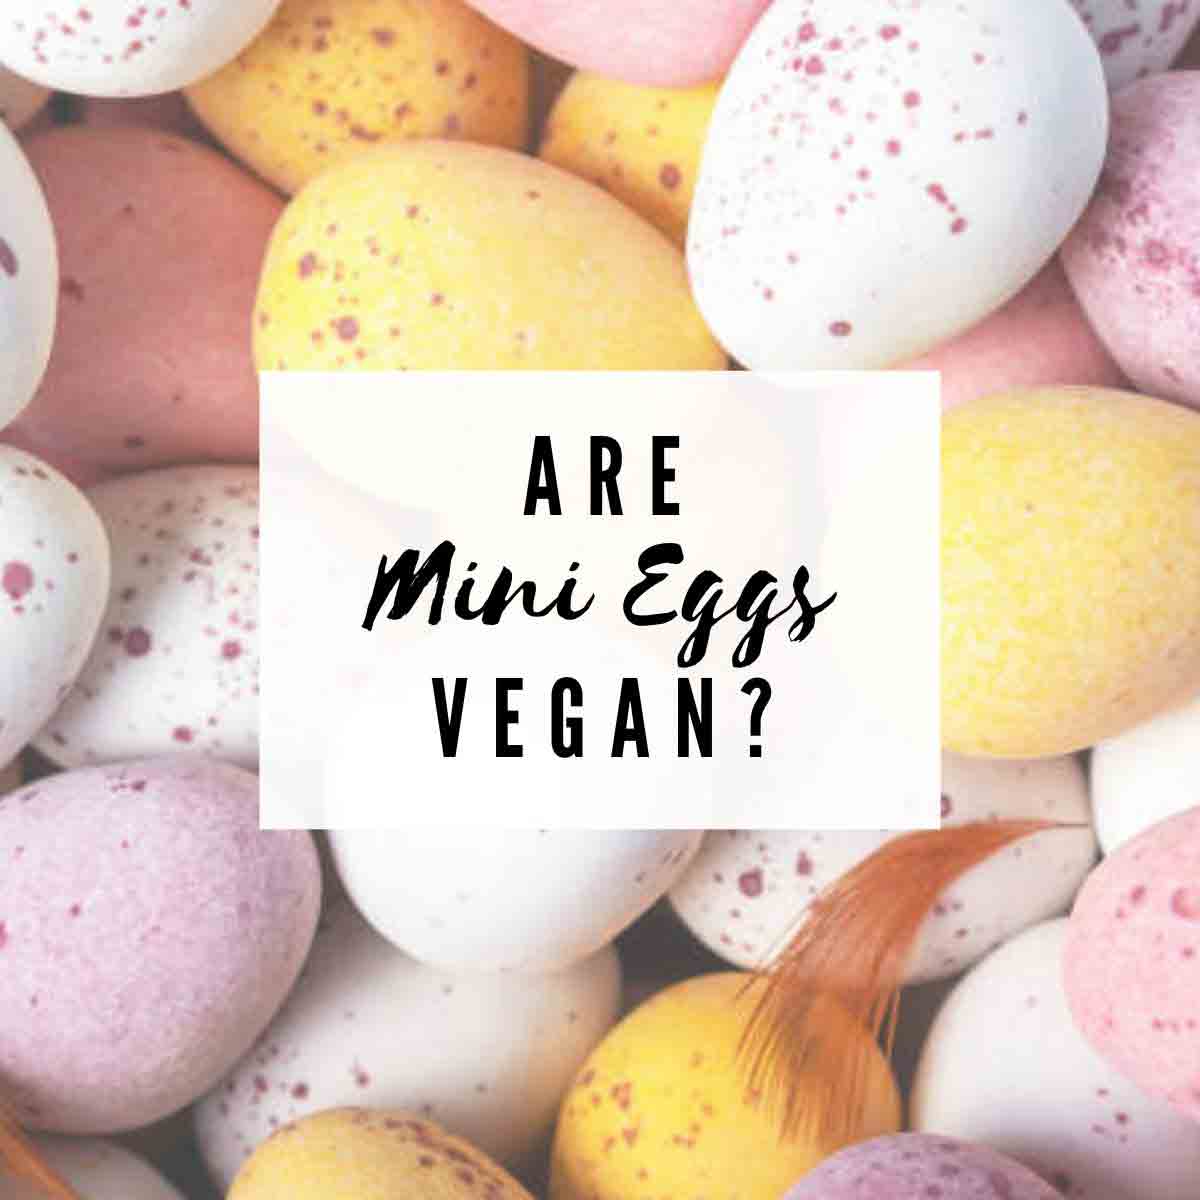 Image Of Mini Eggs With Text Overlay That Reads Are Mini Eggs Vegan